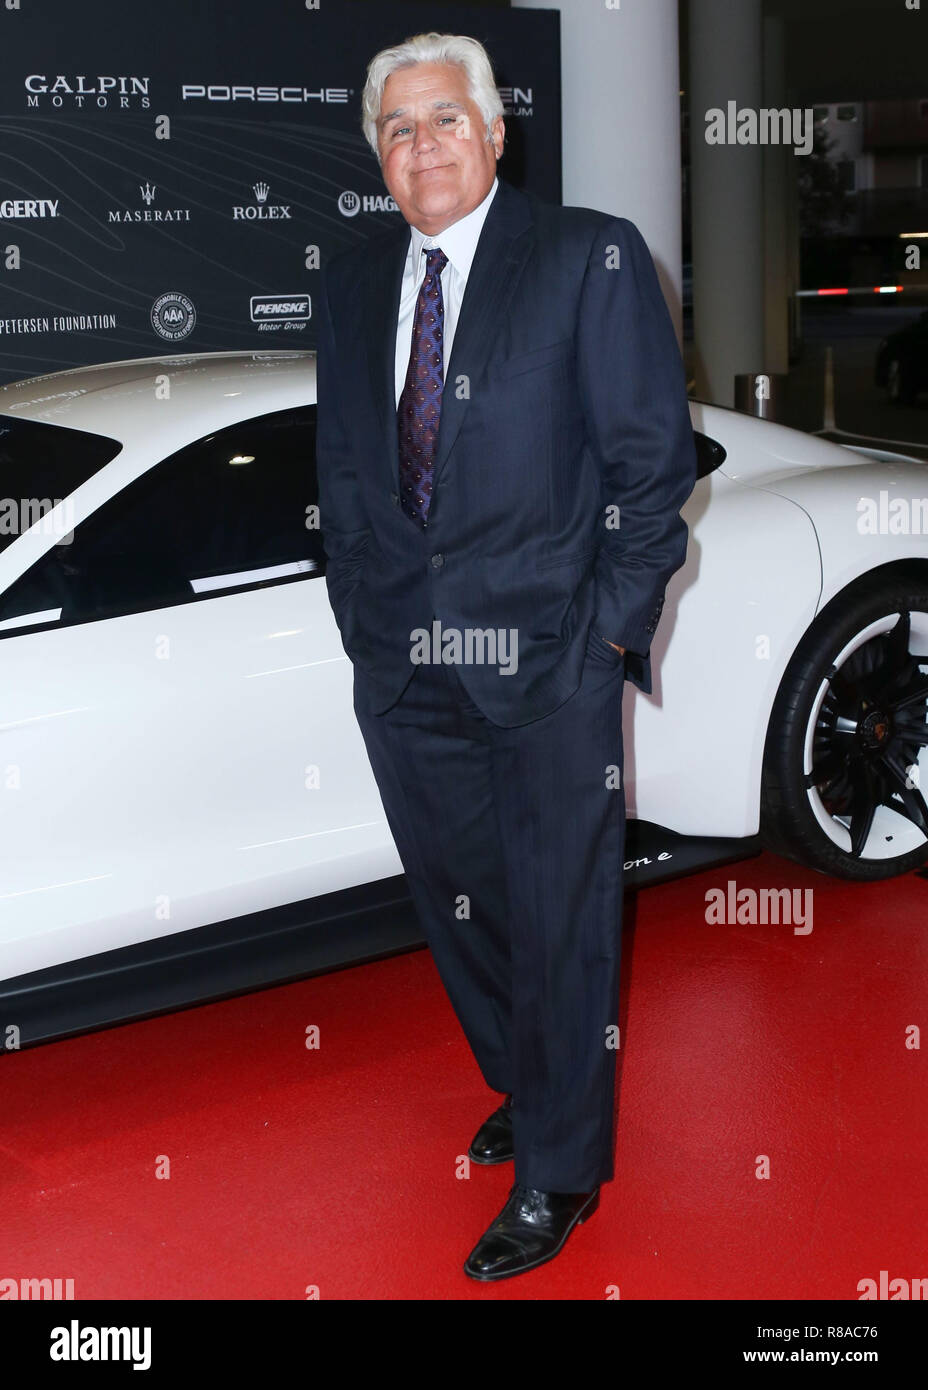 LOS ANGELES, CA, USA - OCTOBER 05: Jay Leno at the Petersen Automotive Museum Gala 2018 held at The Petersen Automotive Museum on October 5, 2018 in Los Angeles, California, United States. (Photo by David Acosta/Image Press Agency) Stock Photo